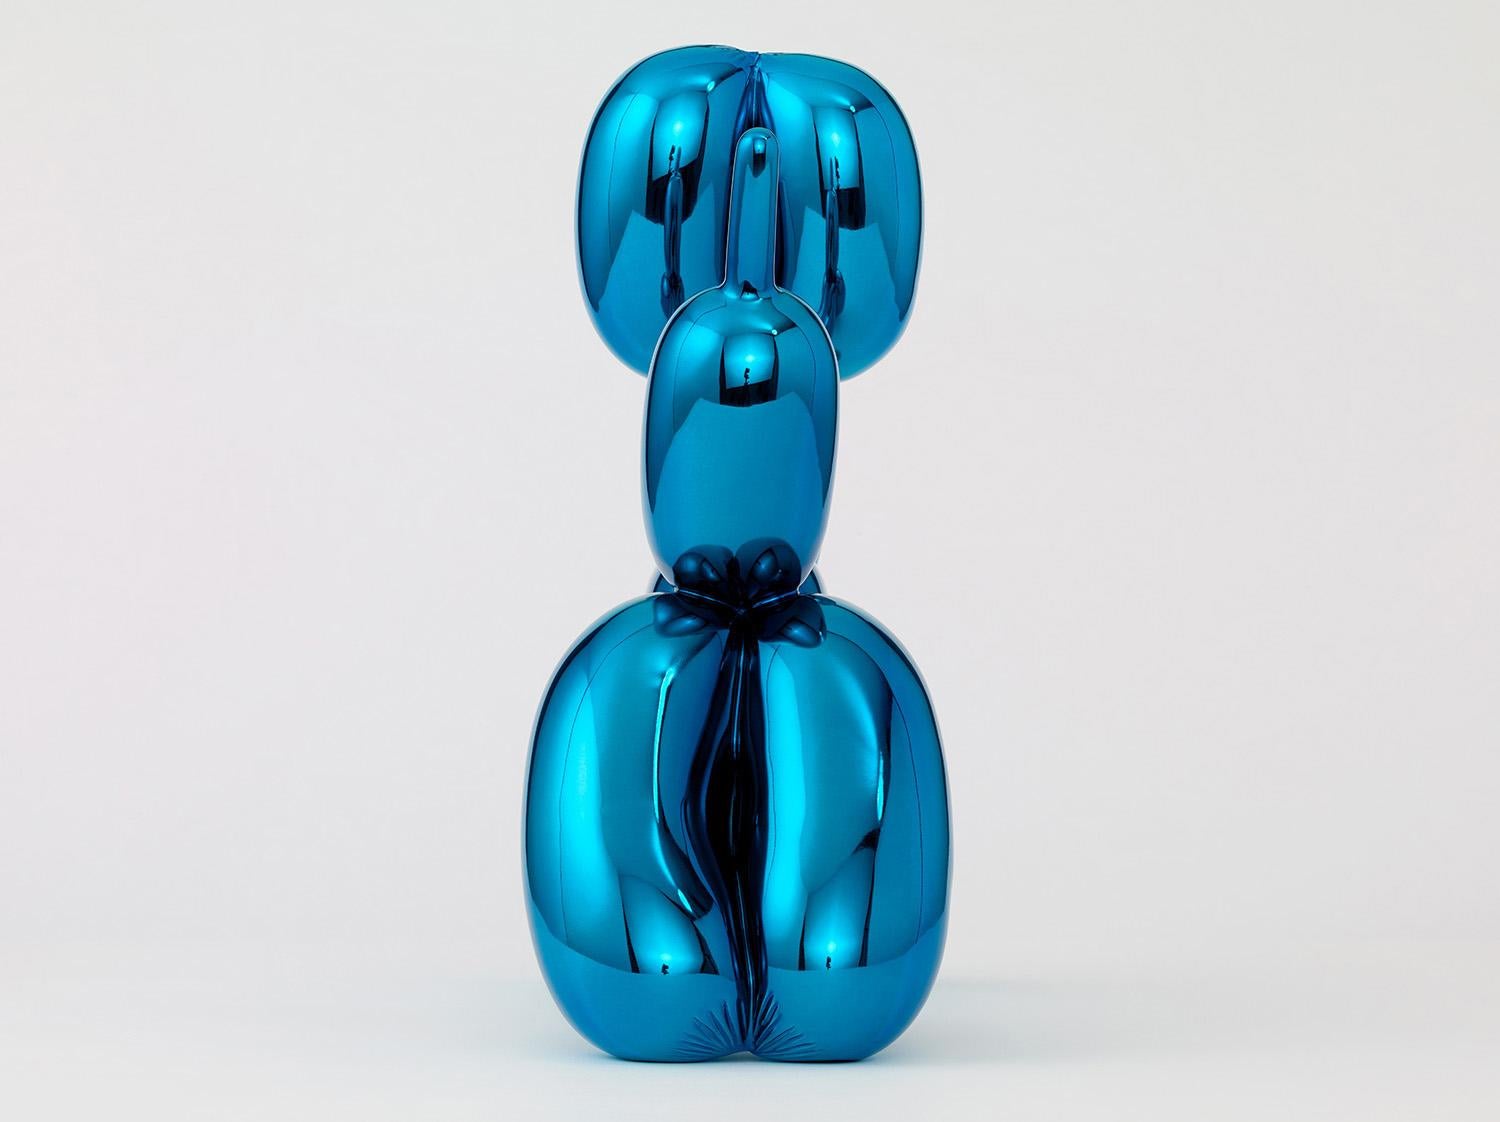 Balloon Dog (Blue) - Contemporary Sculpture by Jeff Koons